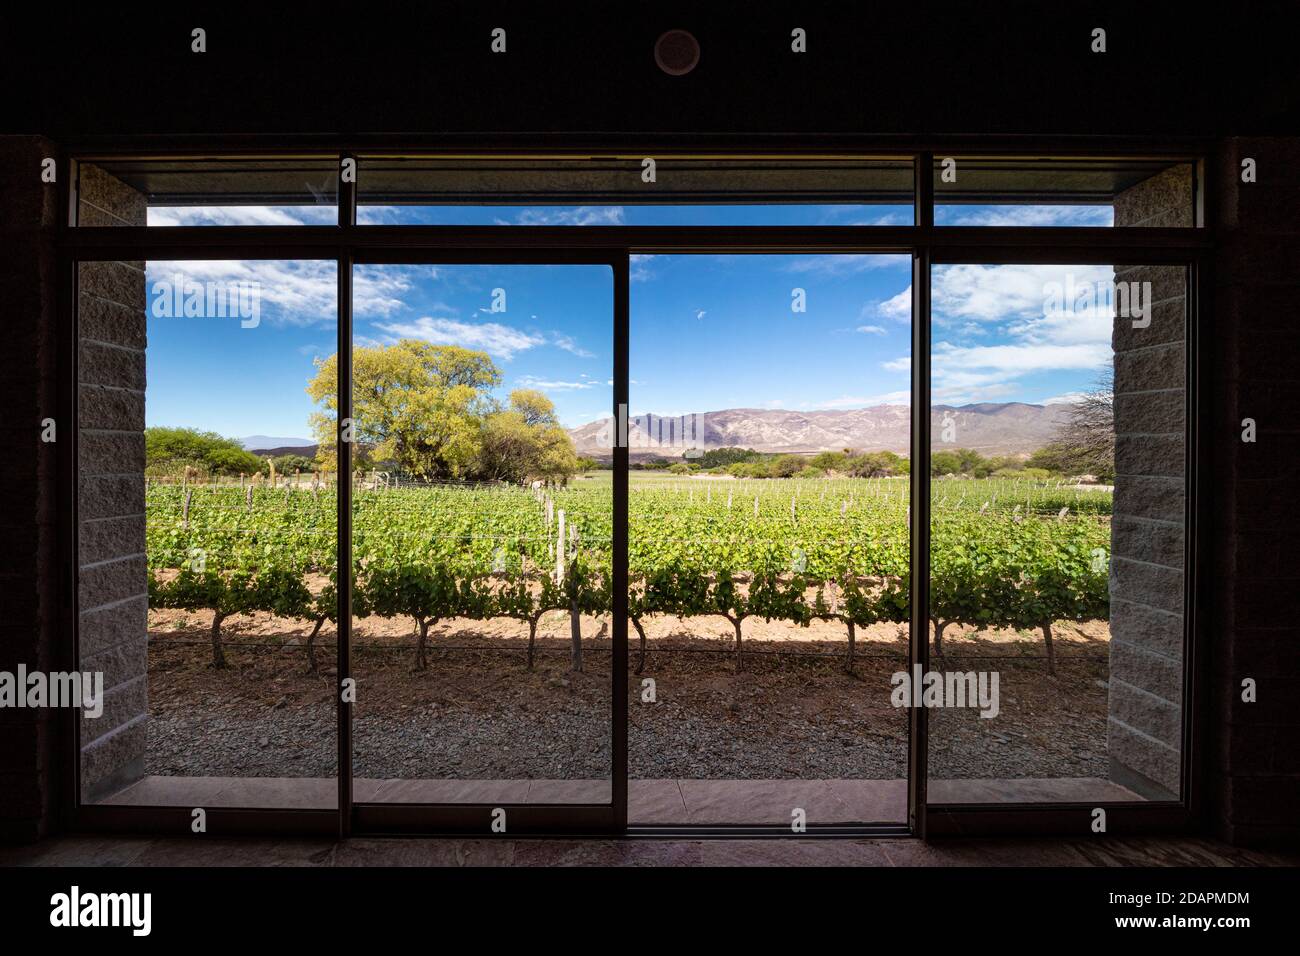 Bodega Colomé, a winery located in high Calchaquí valley at 2,300 meters above sea level, Salta Province, Argentina Stock Photo